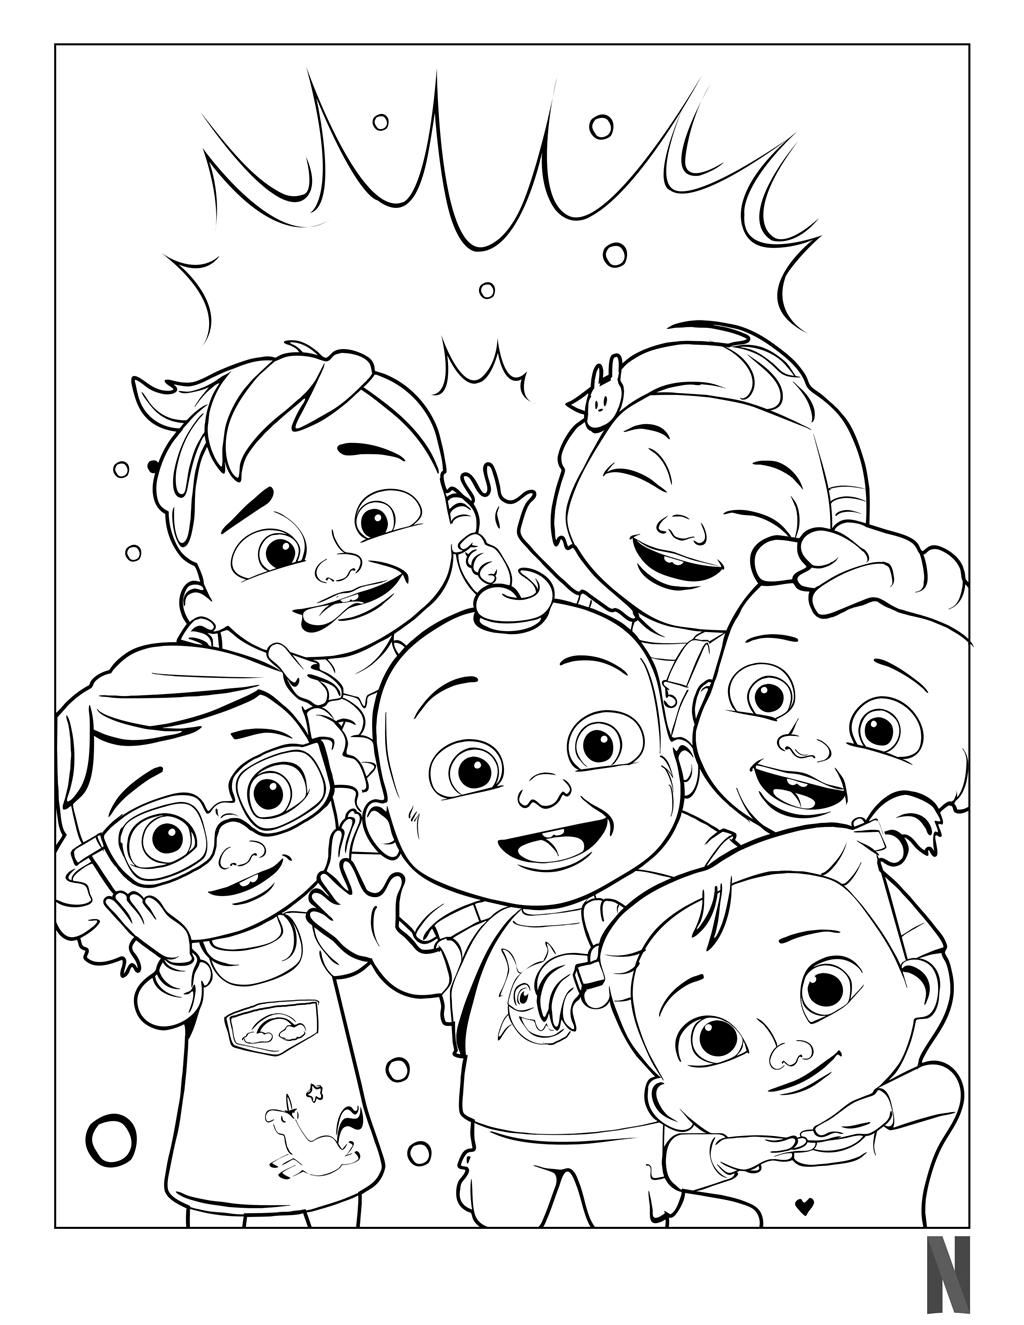 CoComelon Coloring Pages Characters. | Birthday coloring pages, Free kids coloring  pages, Coloring pages